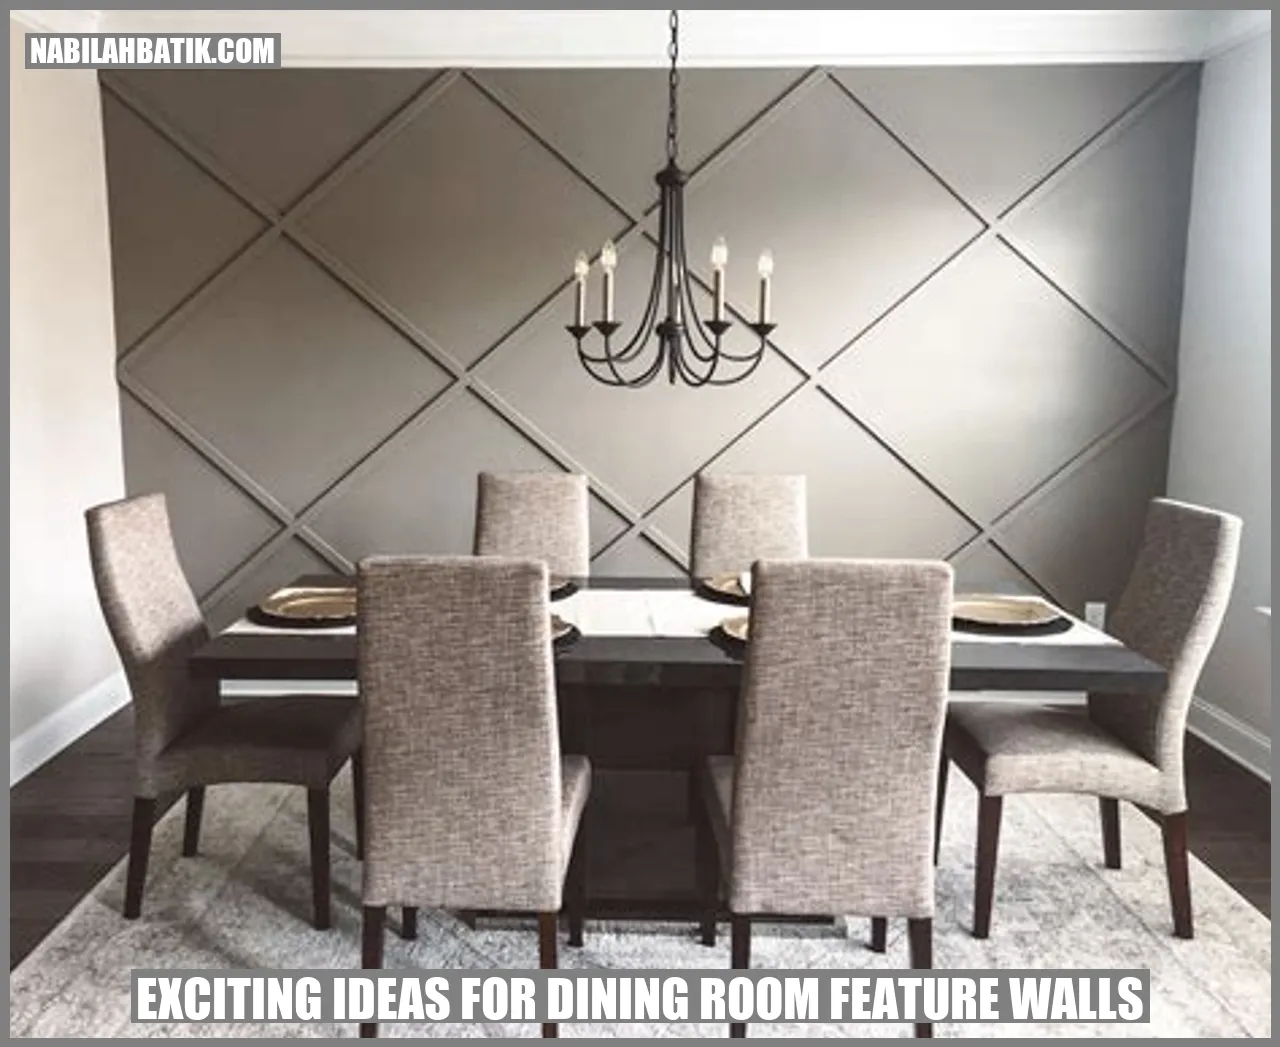 Exciting Ideas for Dining Room Feature Walls